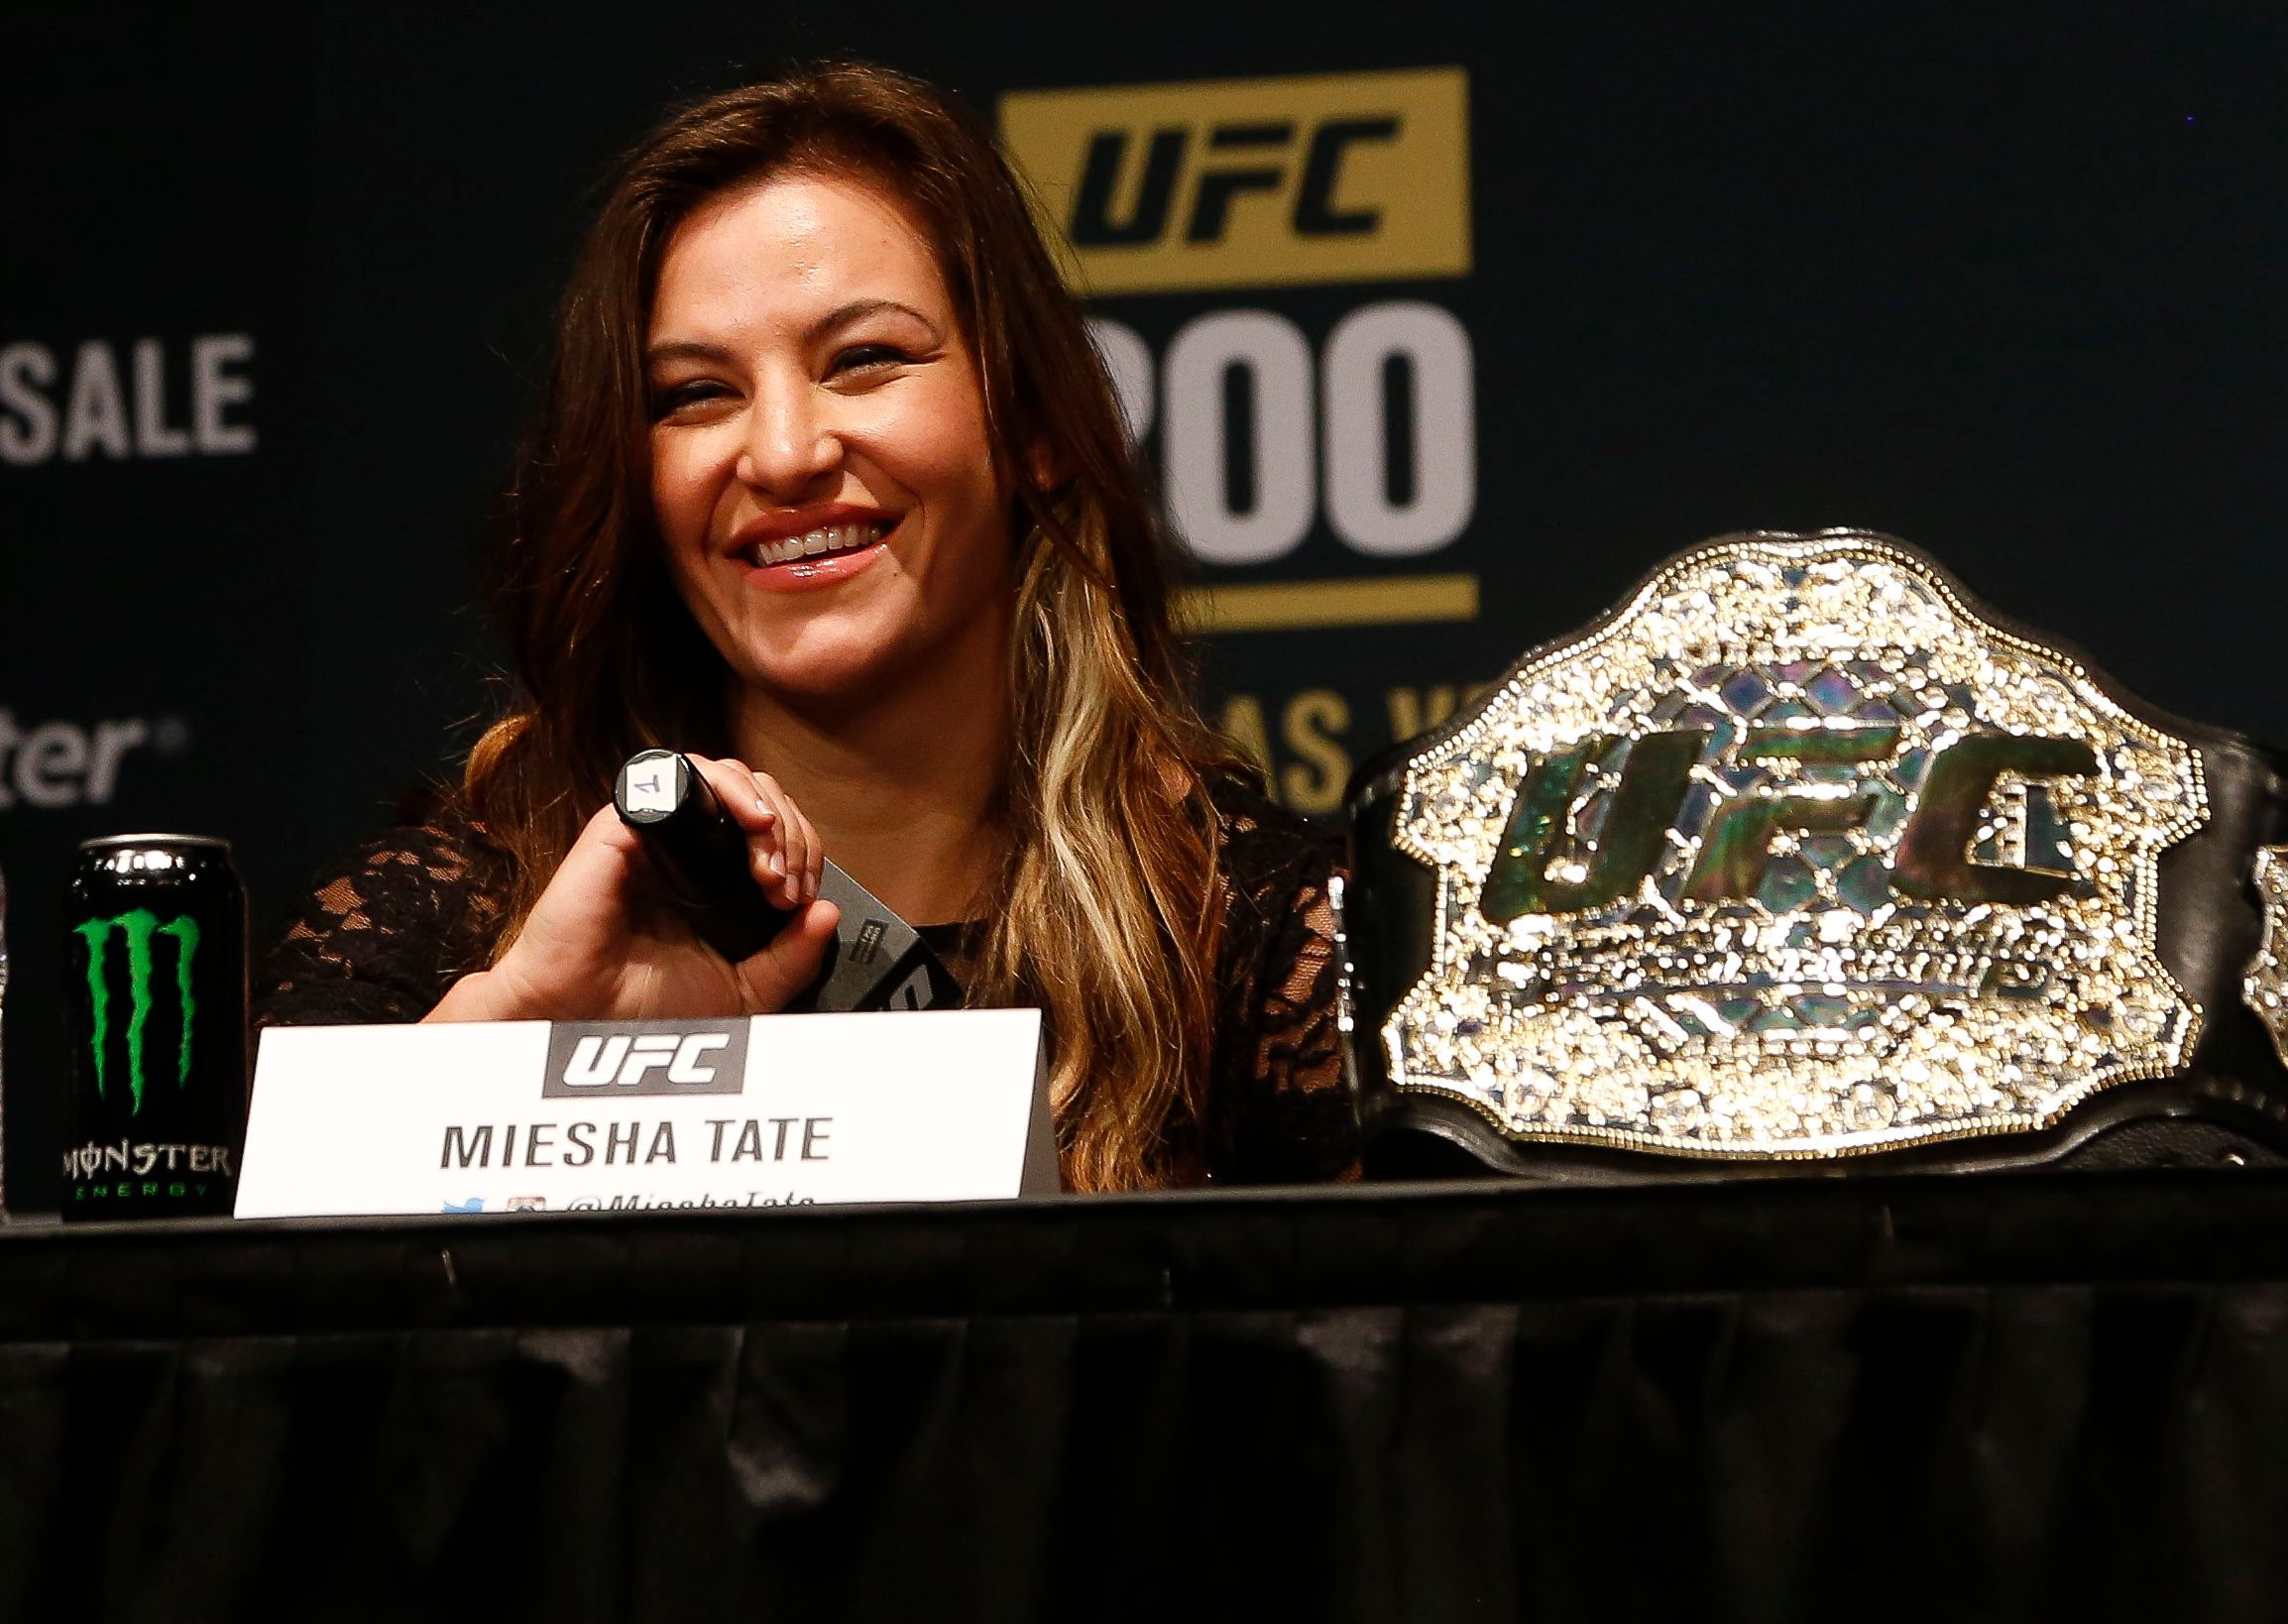 Miesha Tate, UFC women's bantamweight champion appears during a media availability